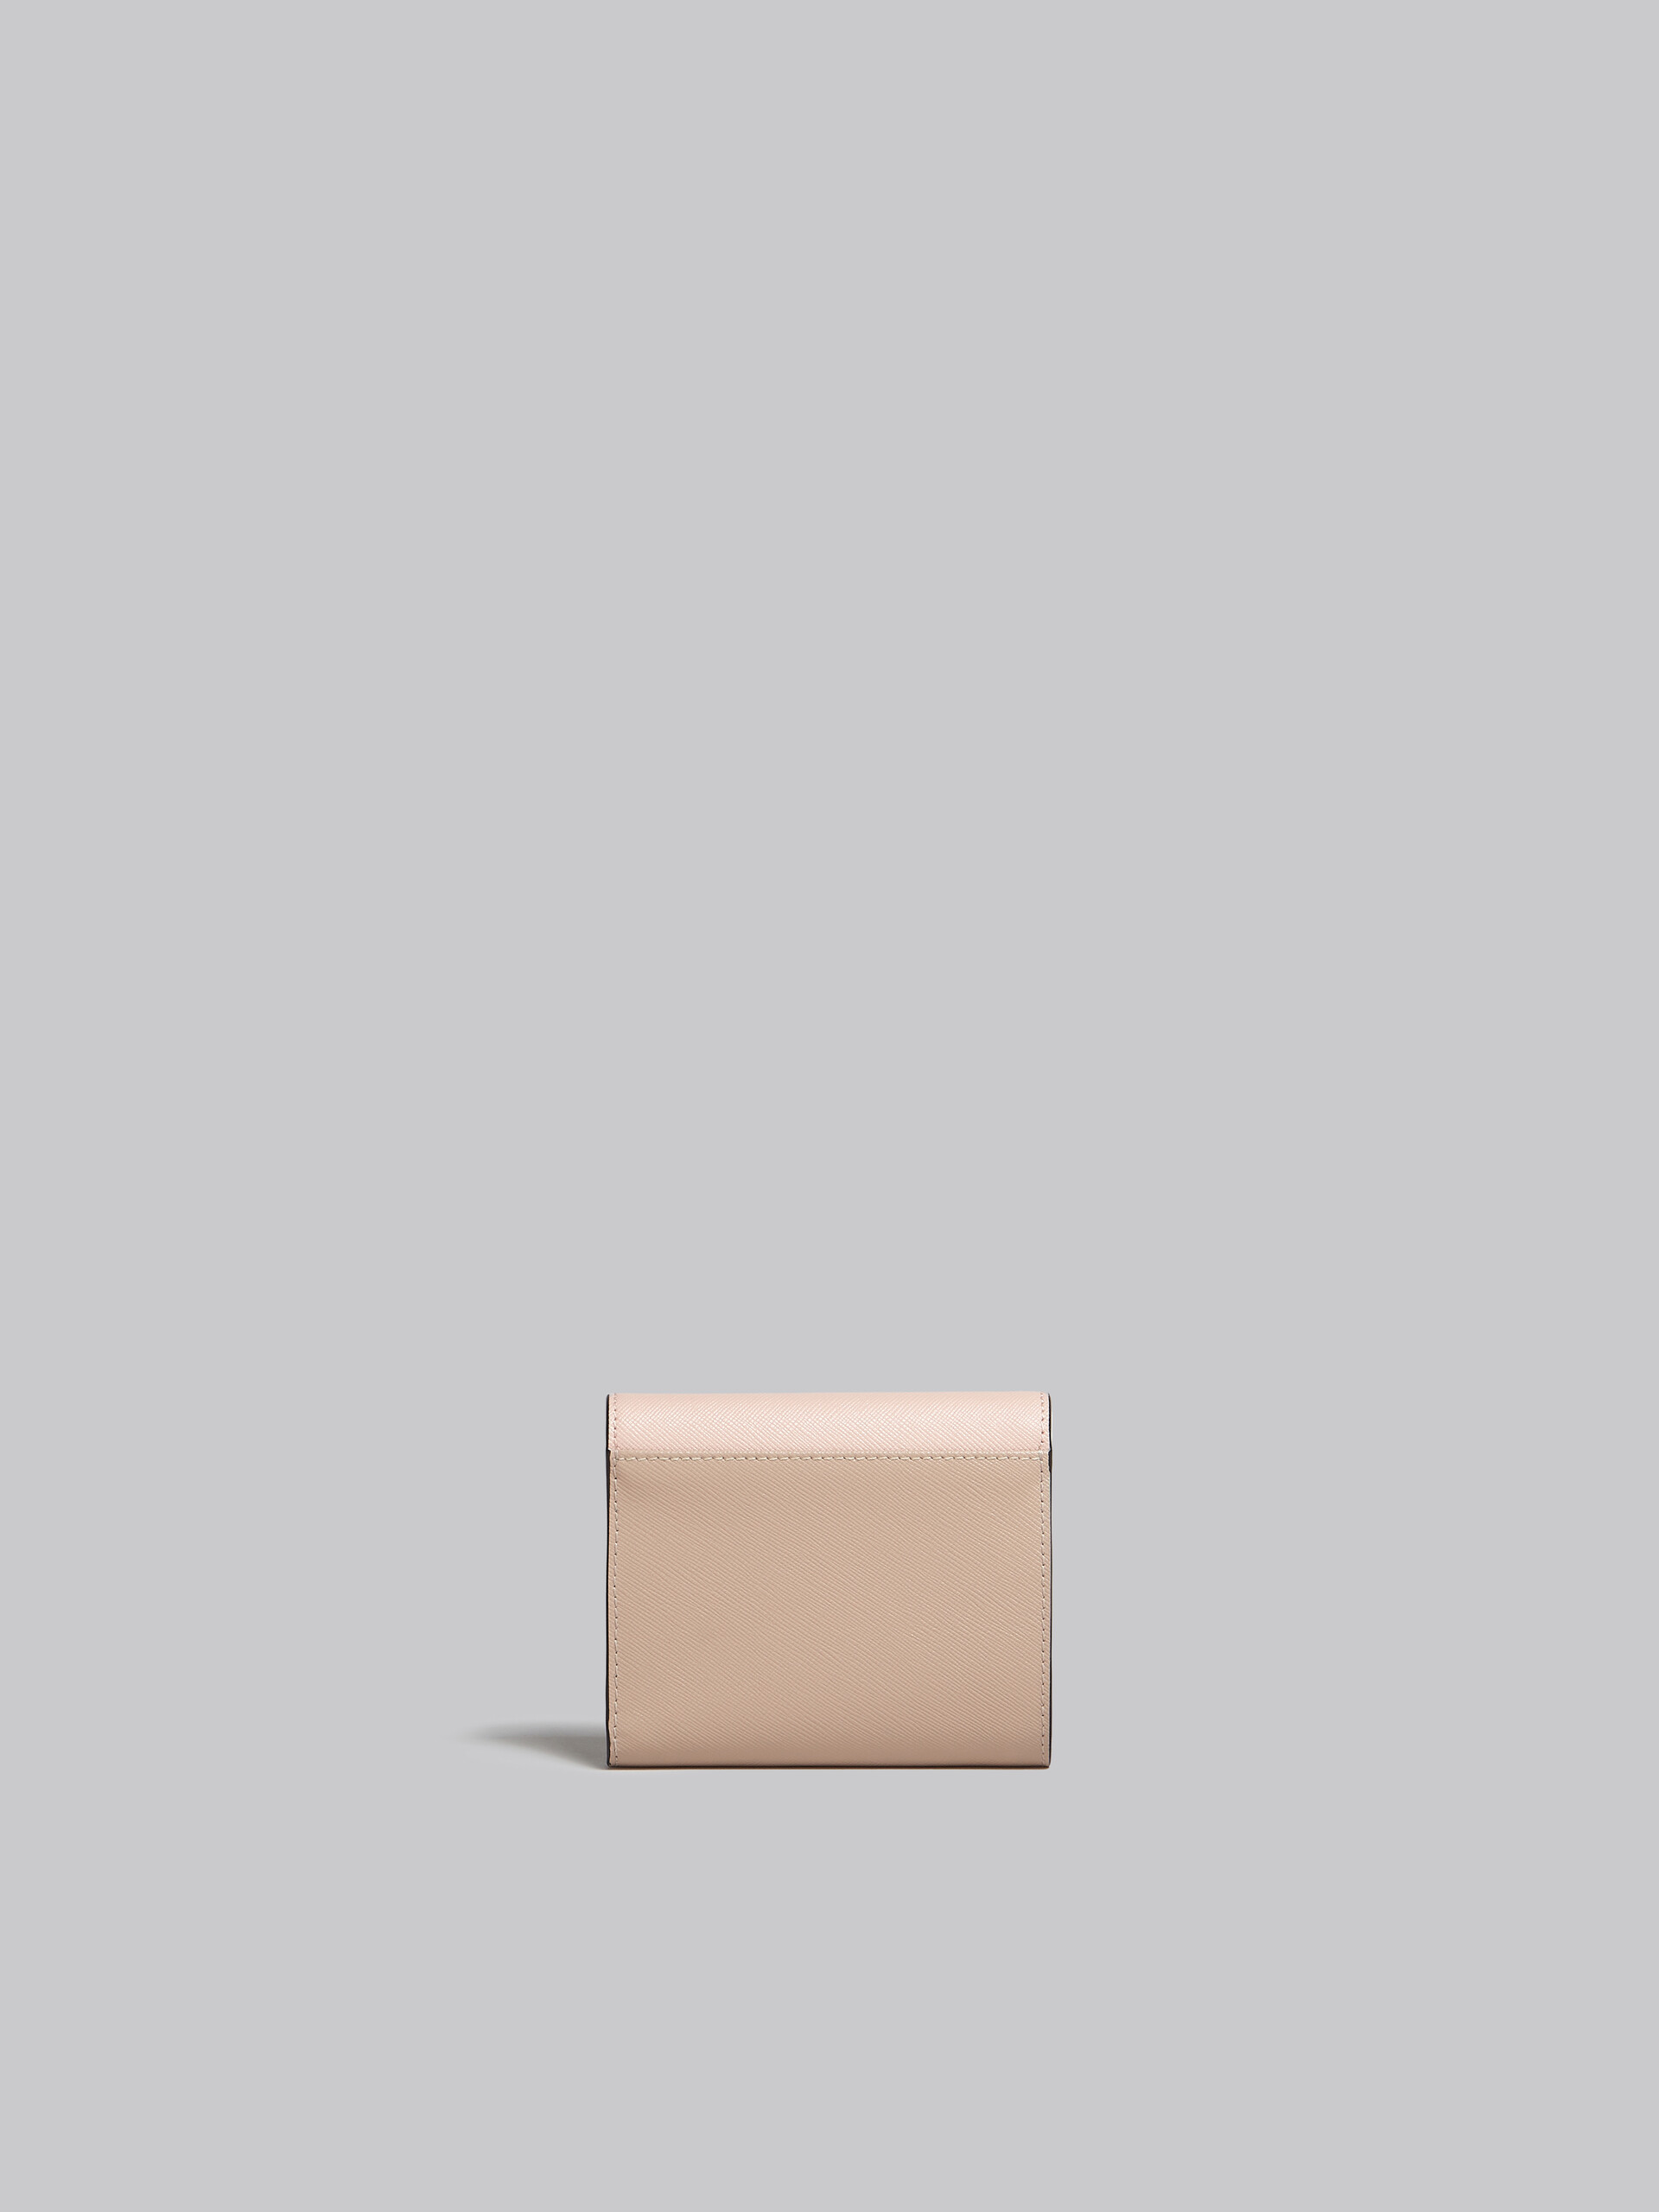 Pink white and beige saffiano leather wallet - Wallets - Image 3